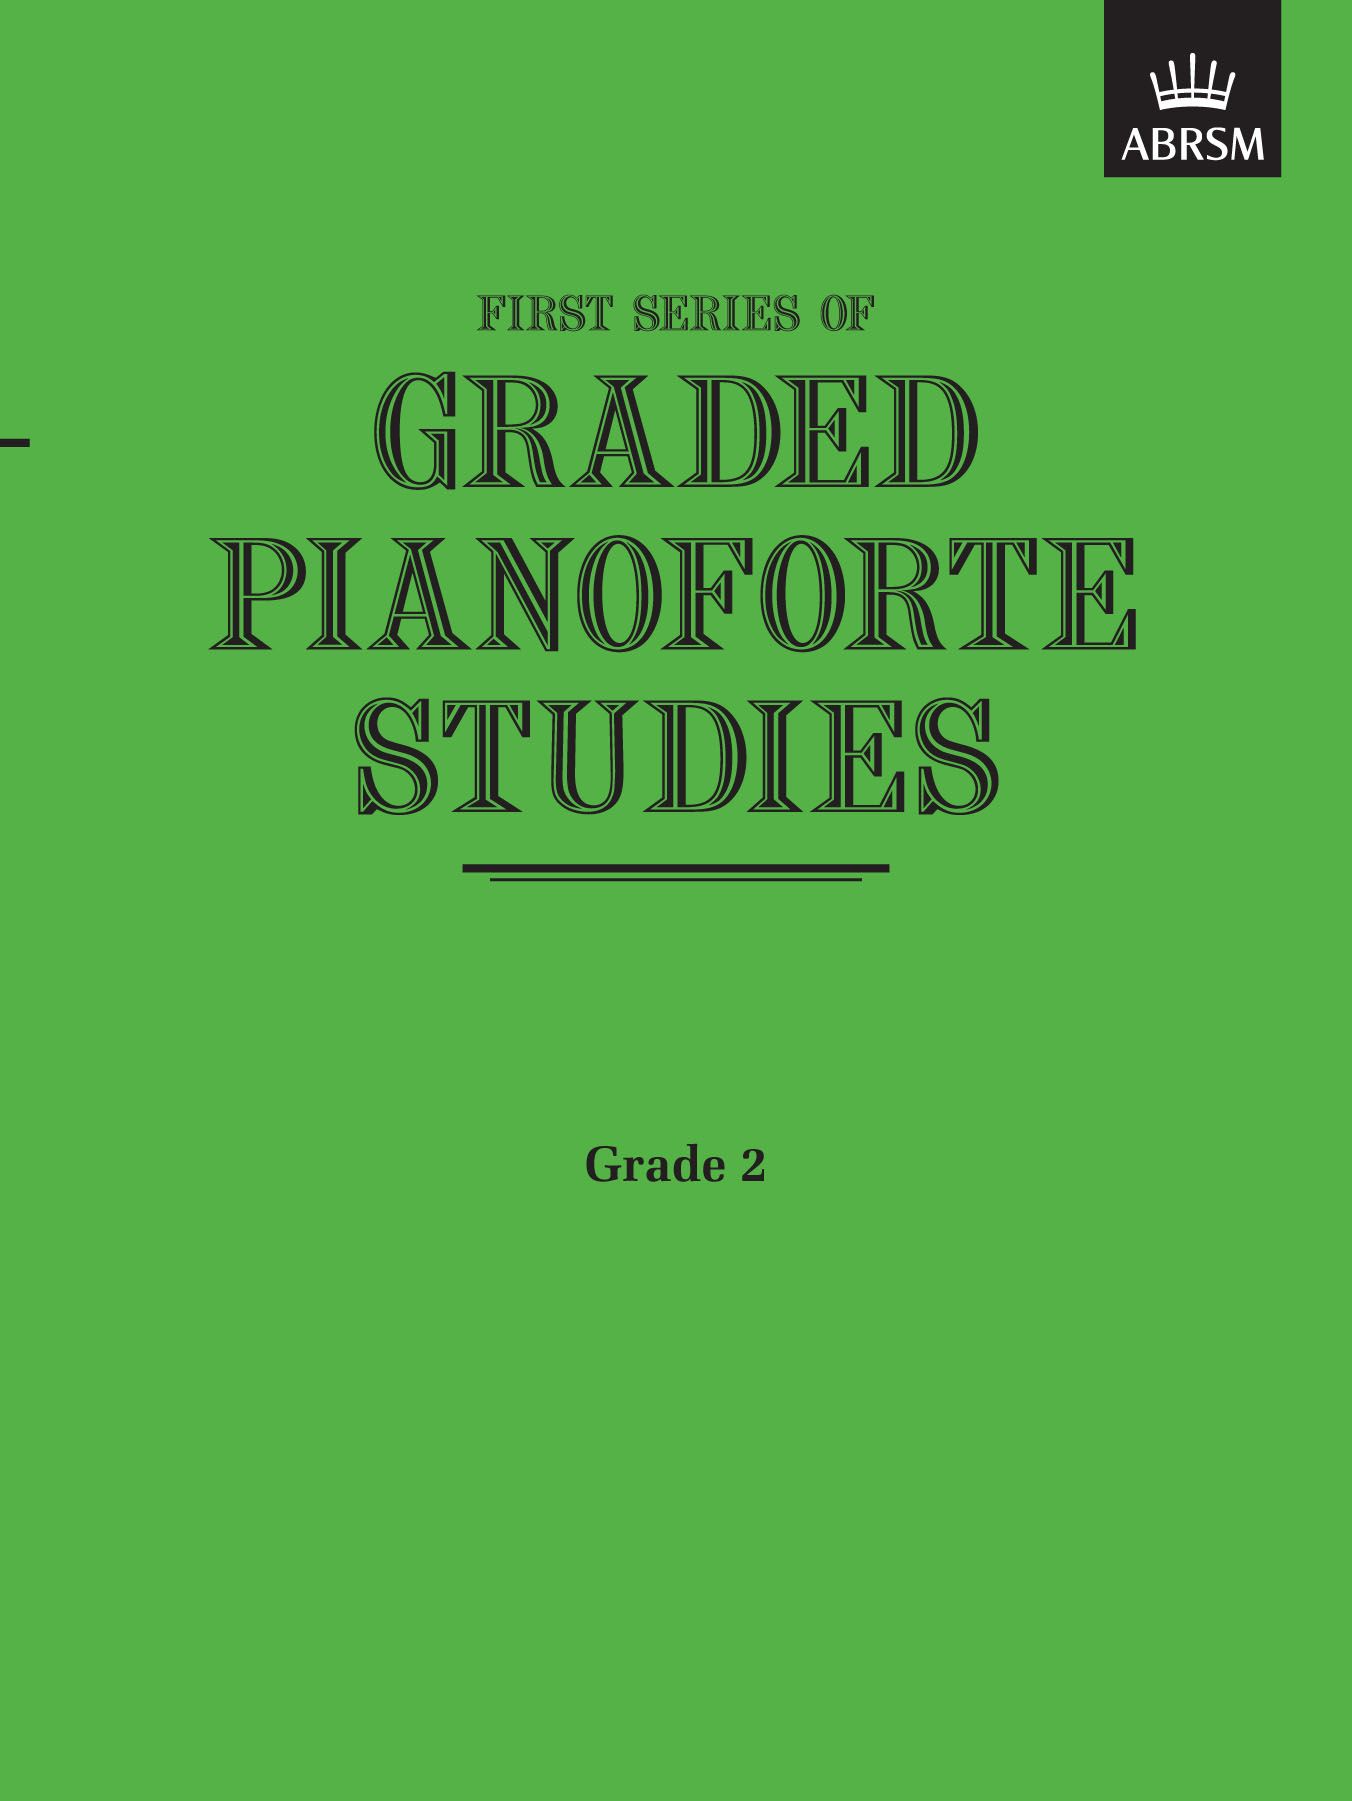 First Series of Graded Pianoforte Studies G2